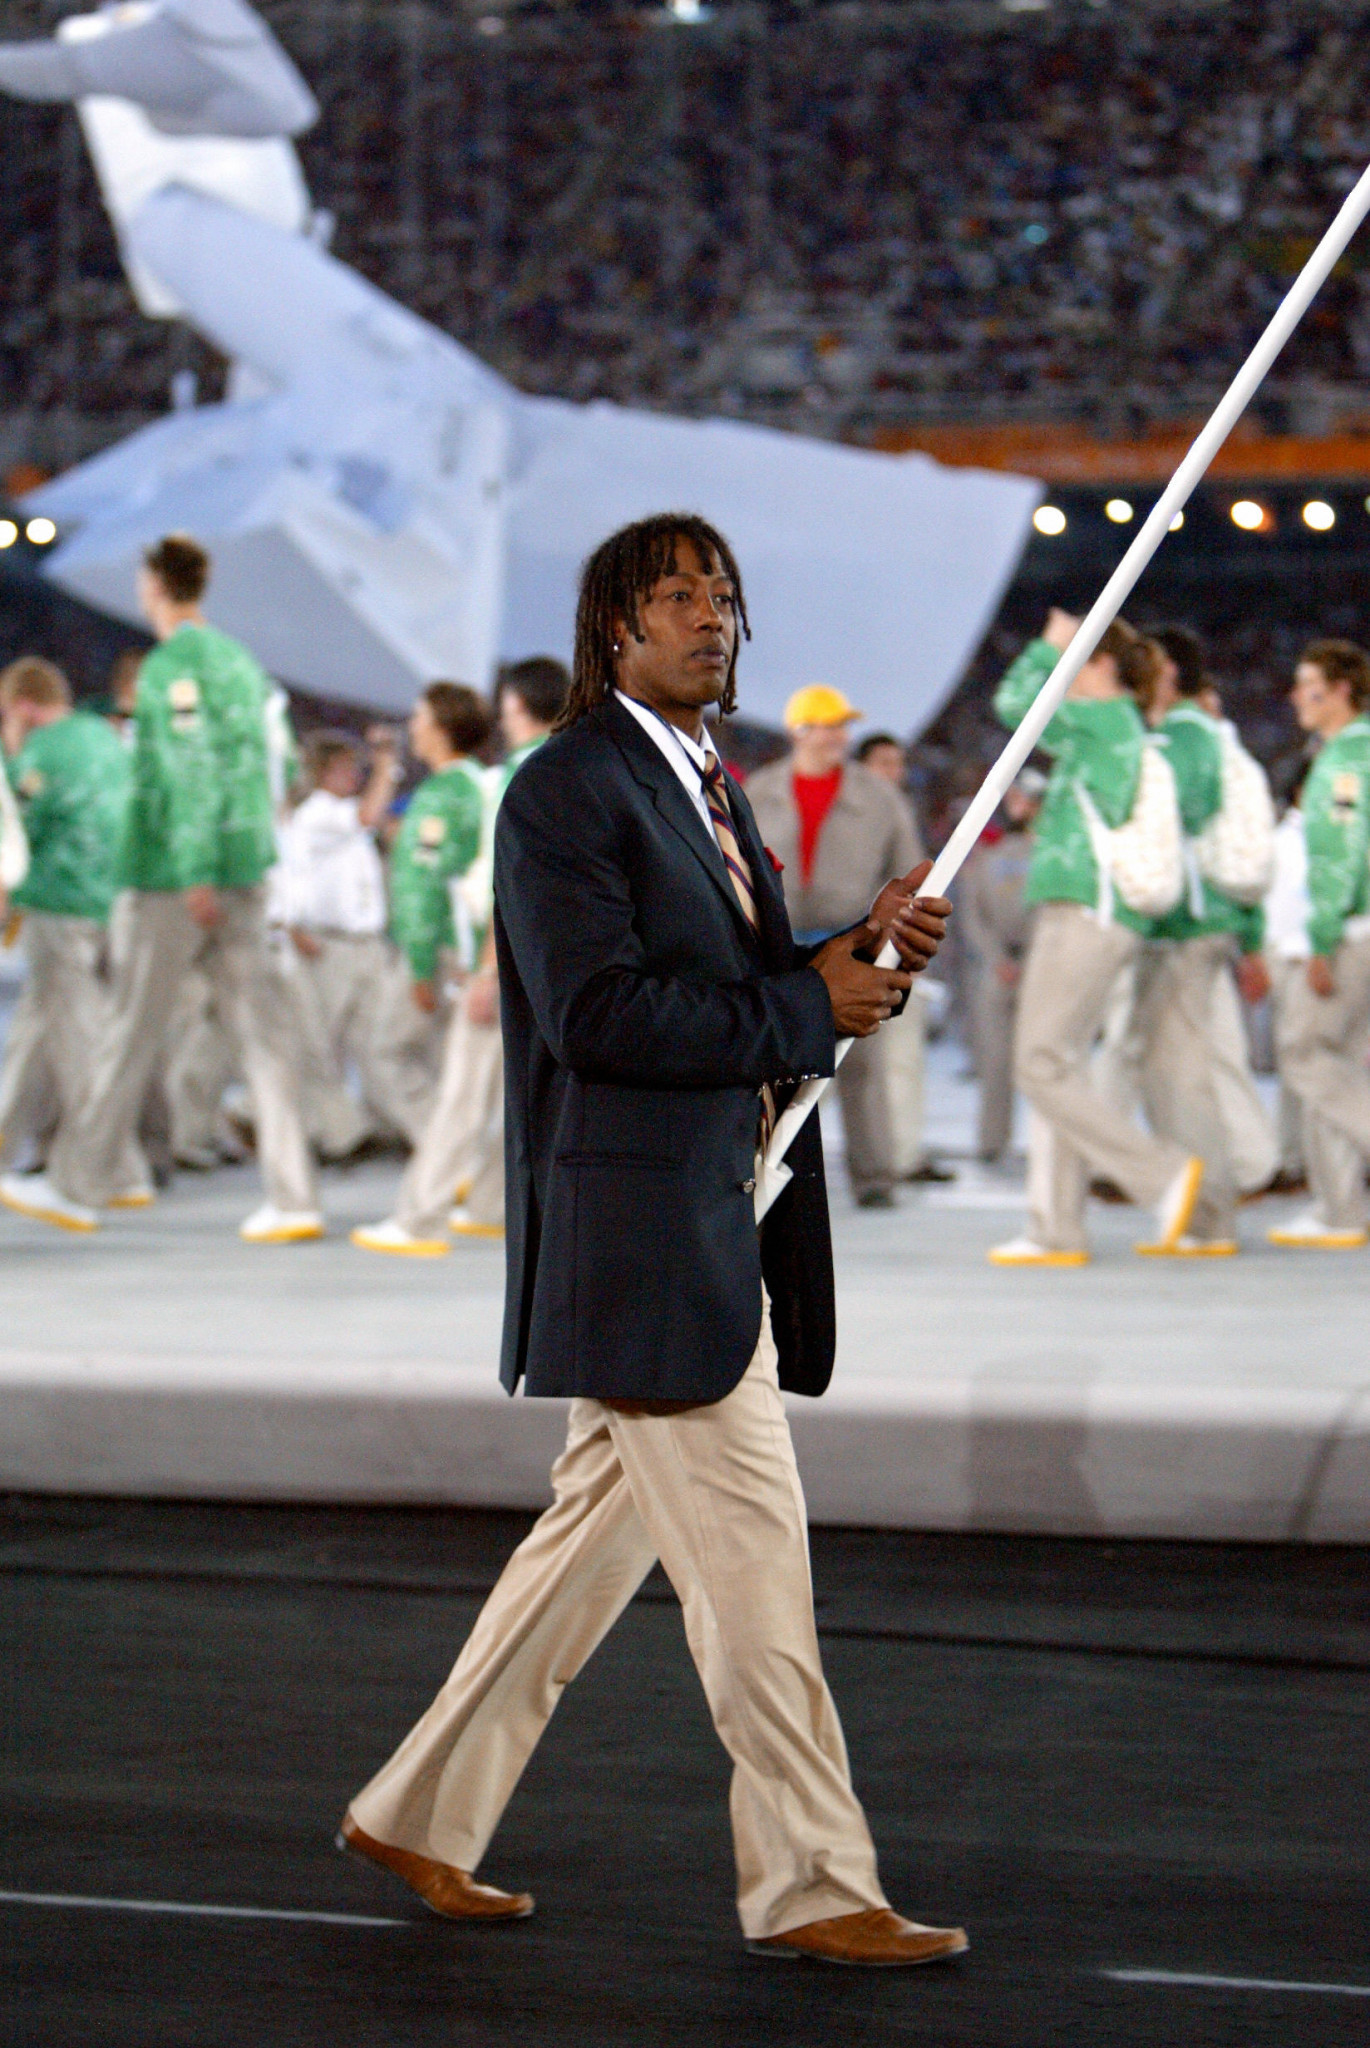 Jackson Richardson carried France's flag during the Opening Ceremony of the 2004 Olympic Games in Athens ©Getty Images